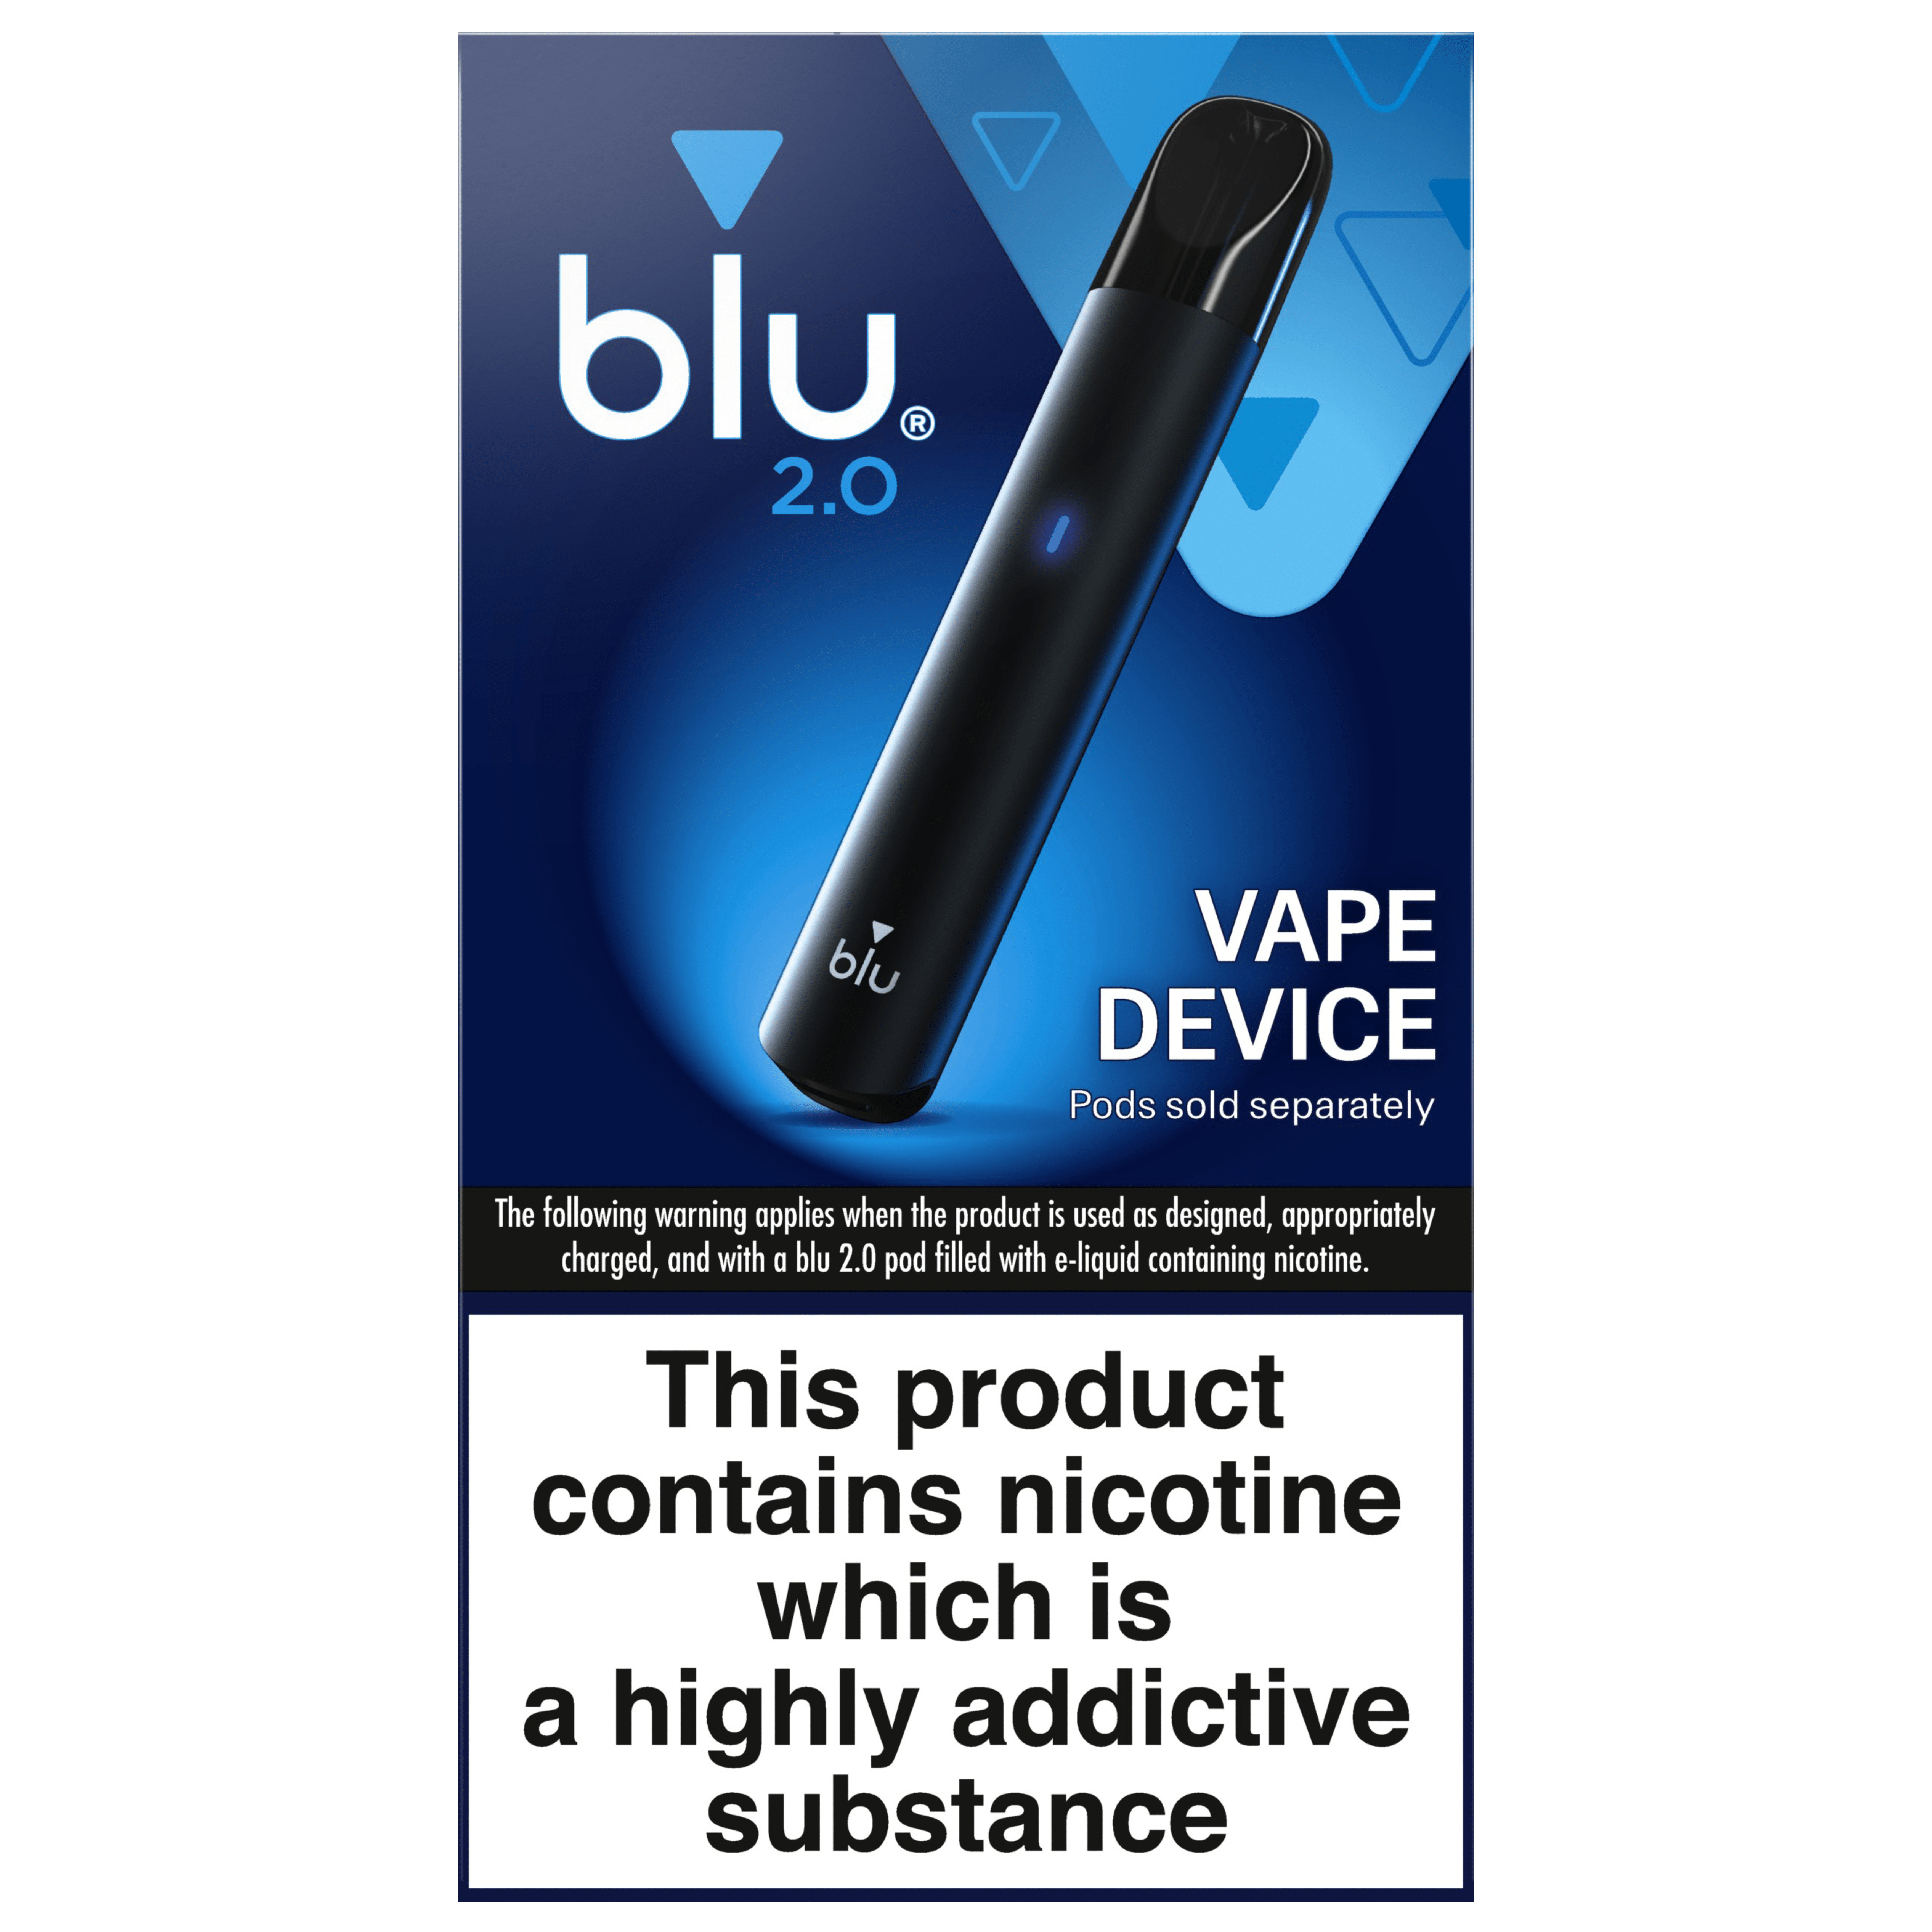 Blu 2.0 now available in wholesale and convenience